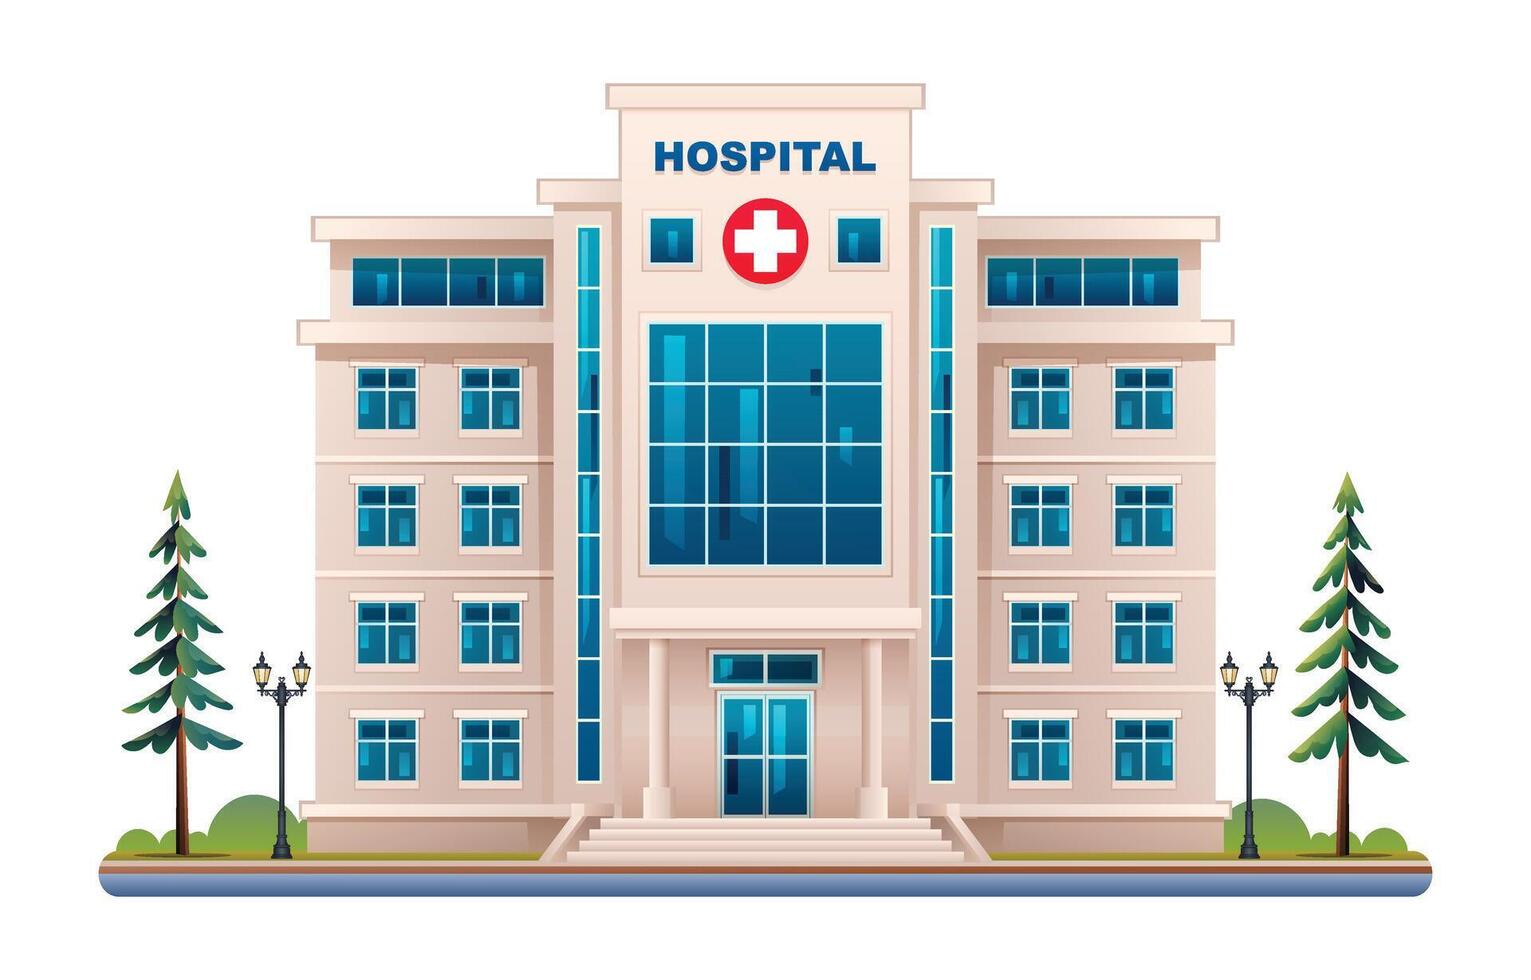 Hospital building illustration. Medical clinic vector isolated on white background